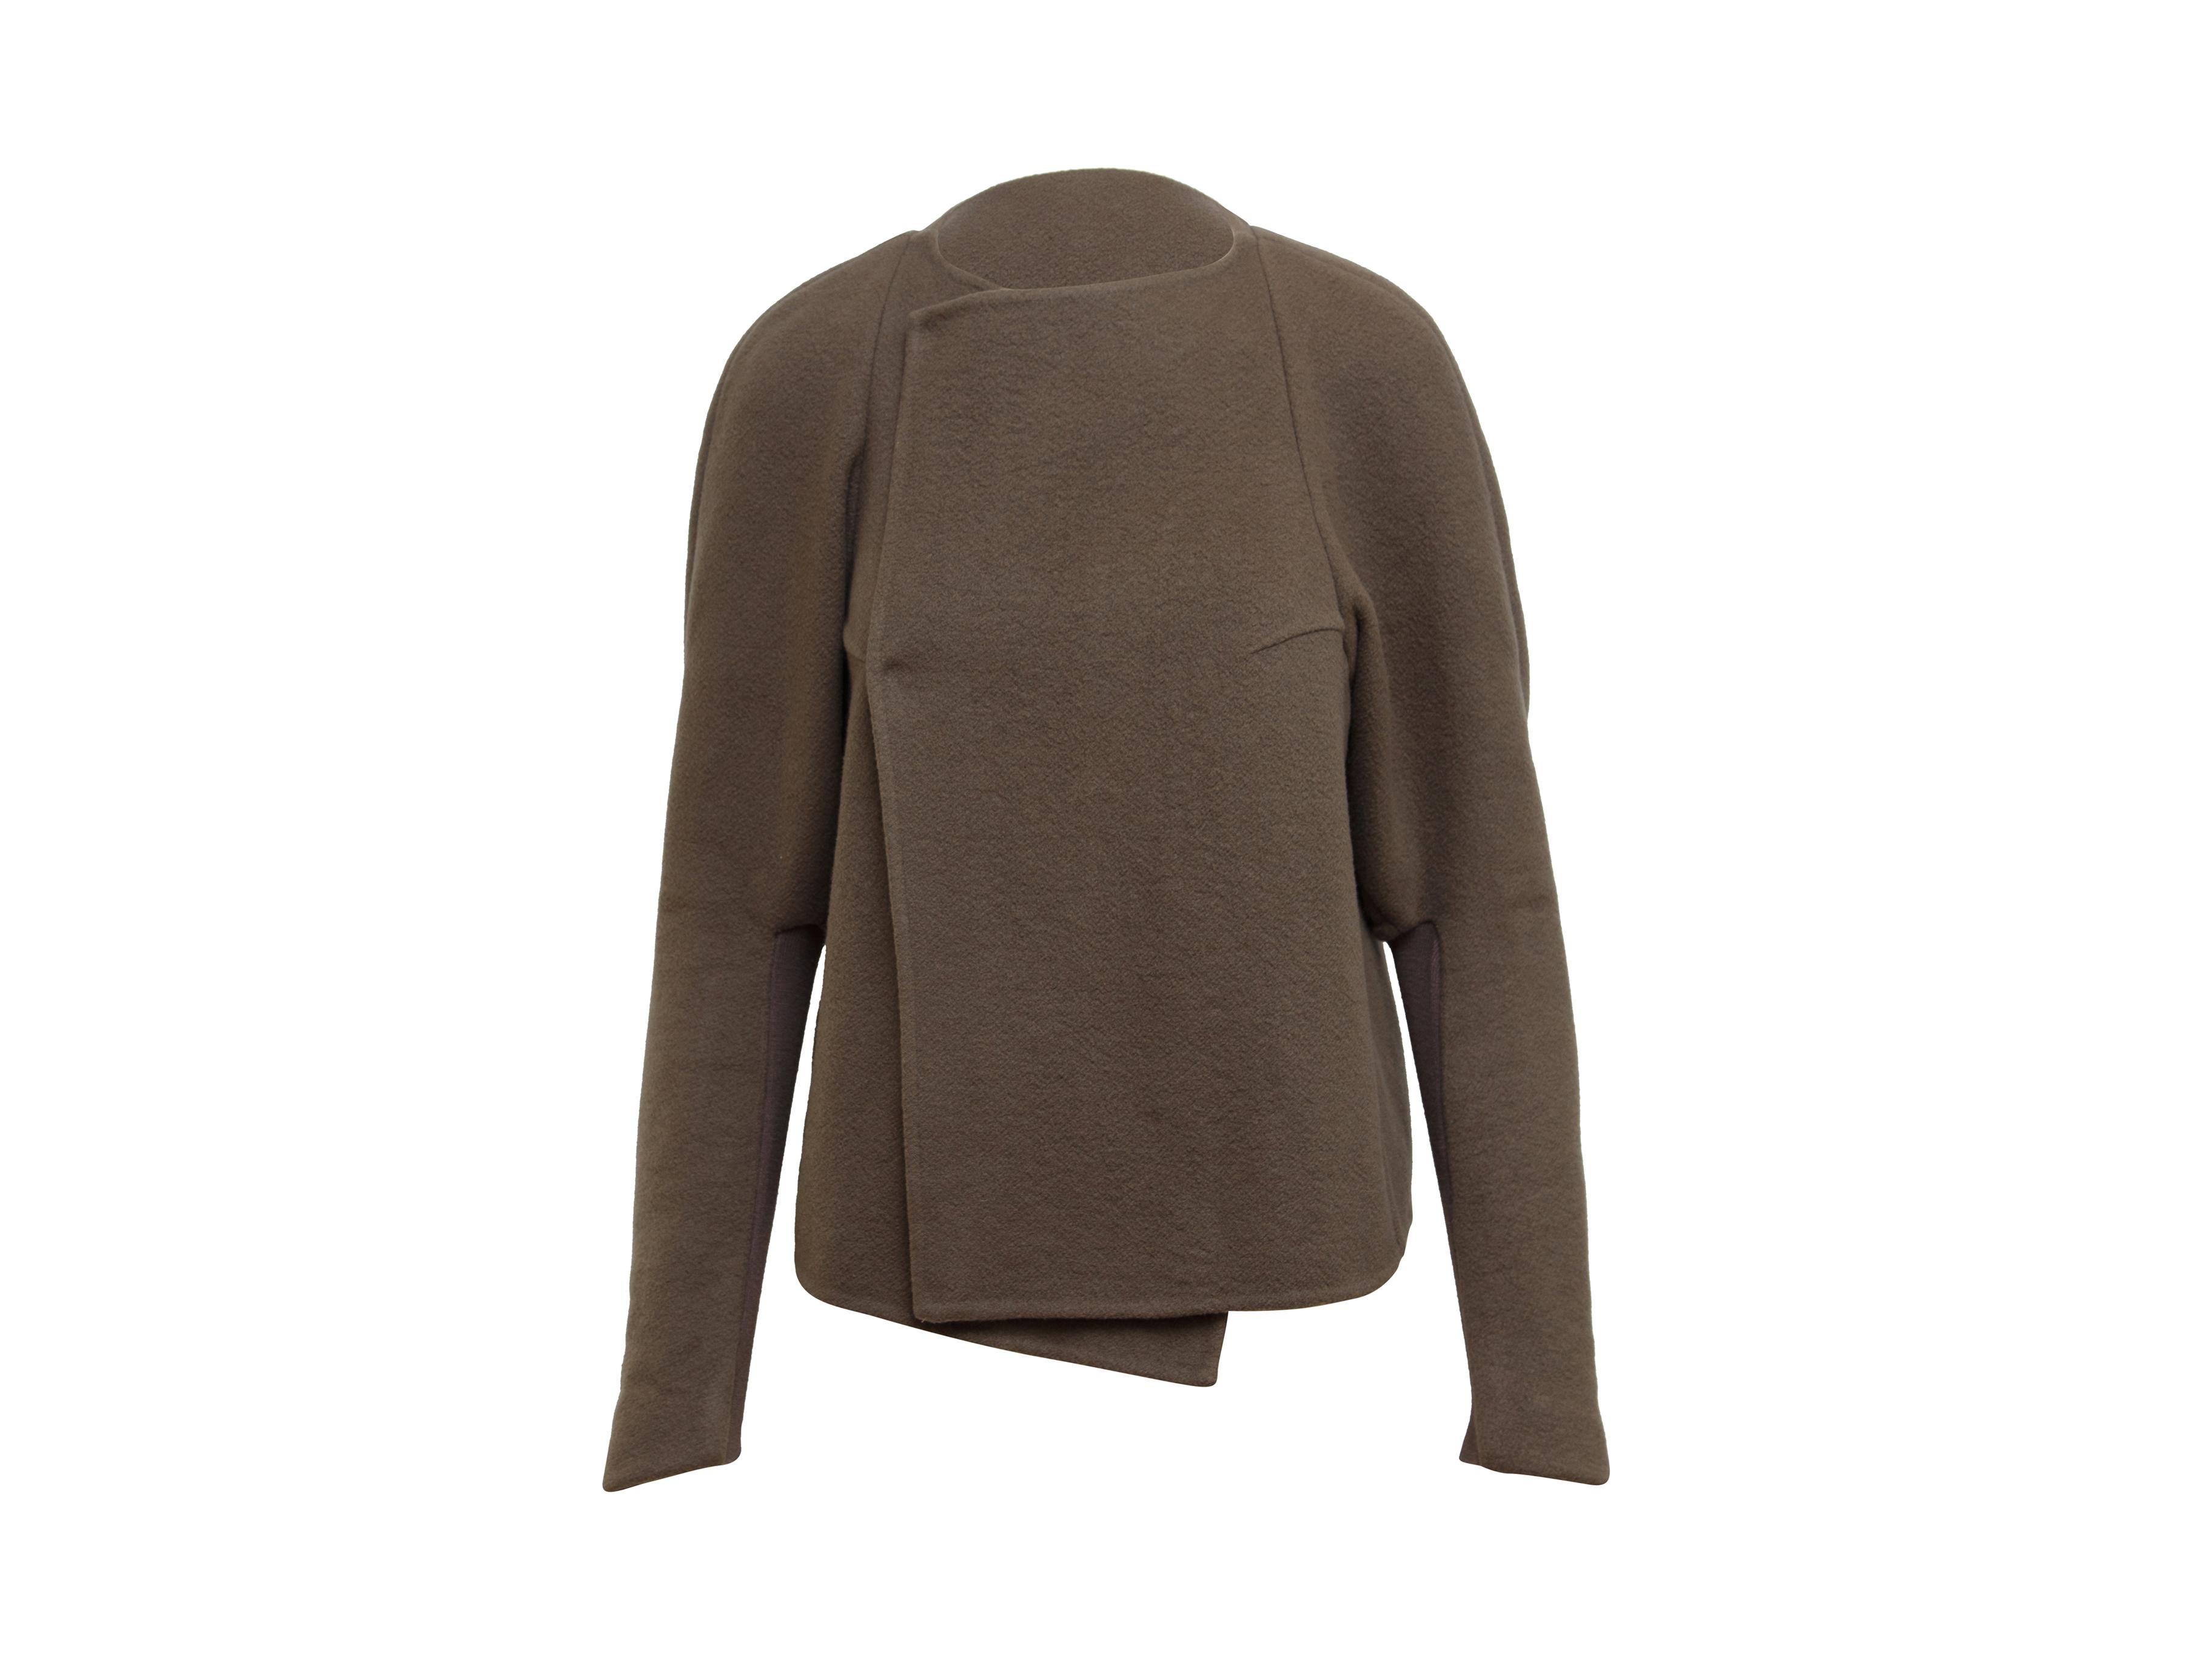 Product details: Taupe cashmere jacket by Rick Owens. Crew neck. Long sleeves. Asymmetrical hem. Snap closures at front. 40